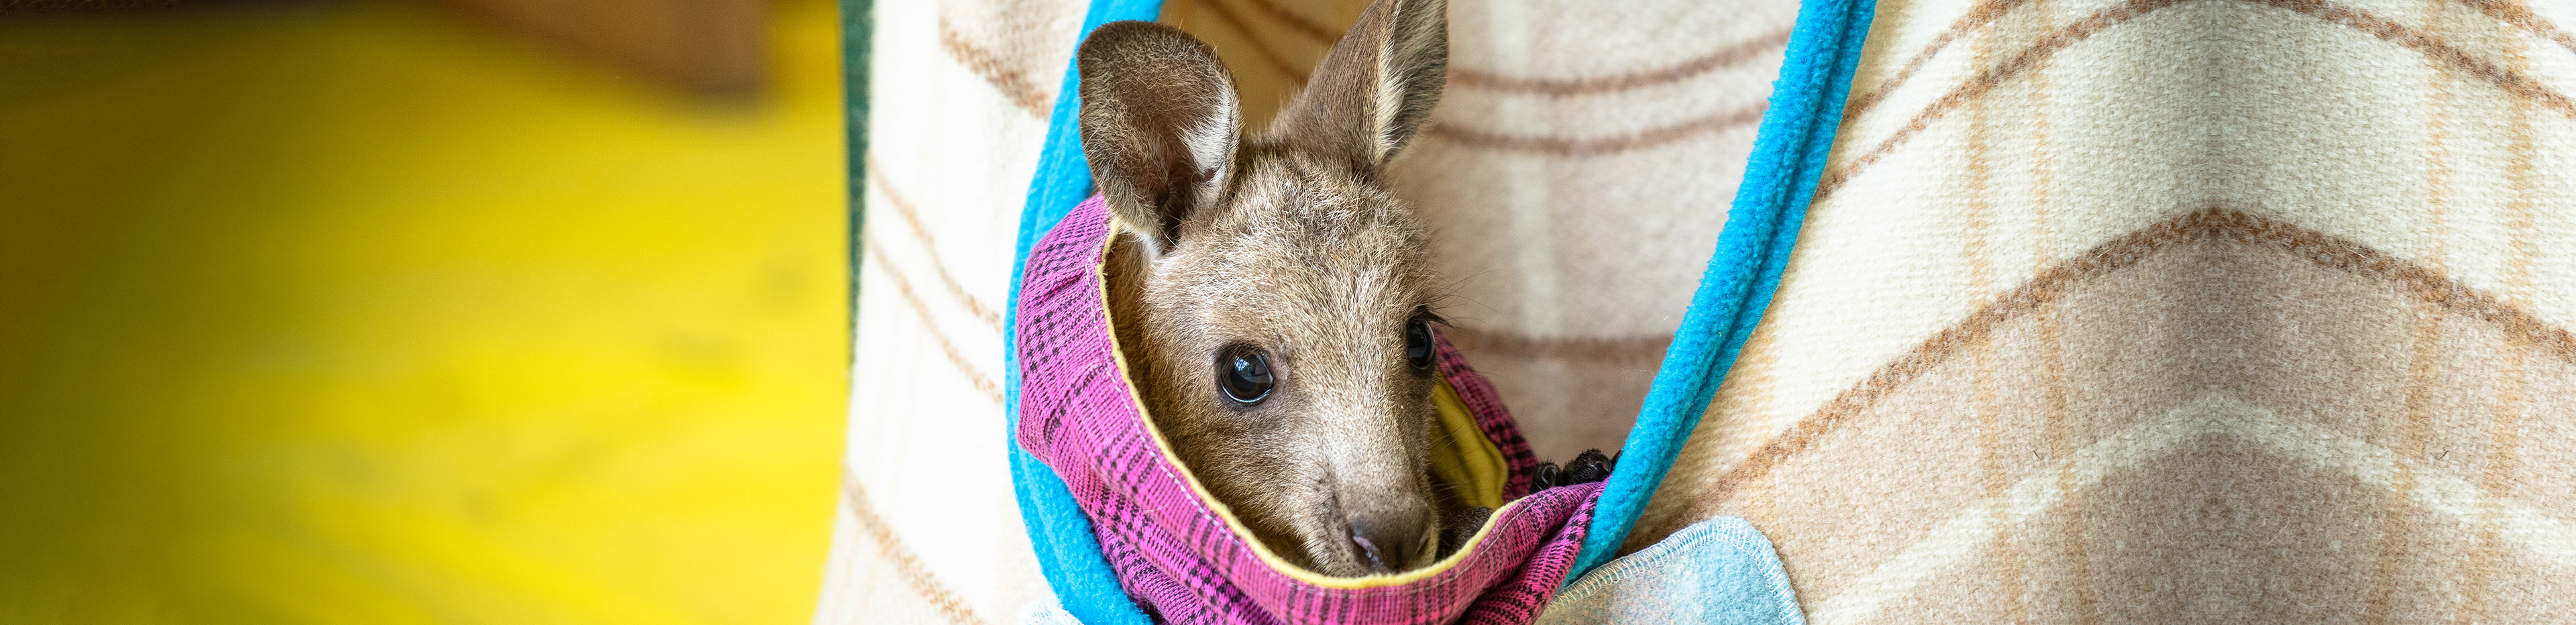 kangaroo joey in knitted pouch